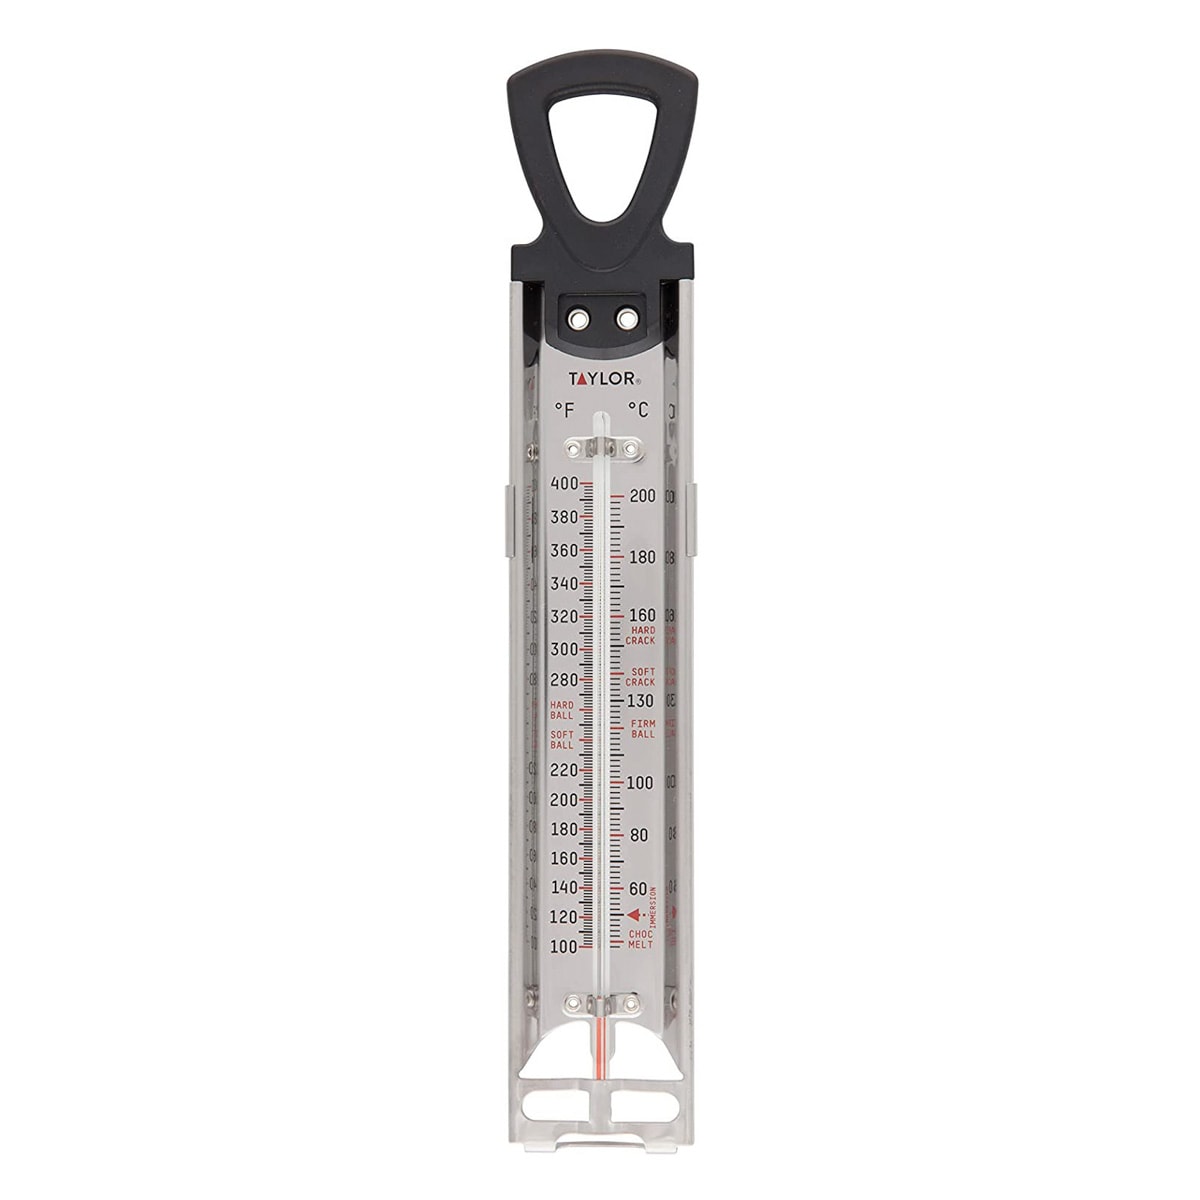 One stainless steel candy thermometer.